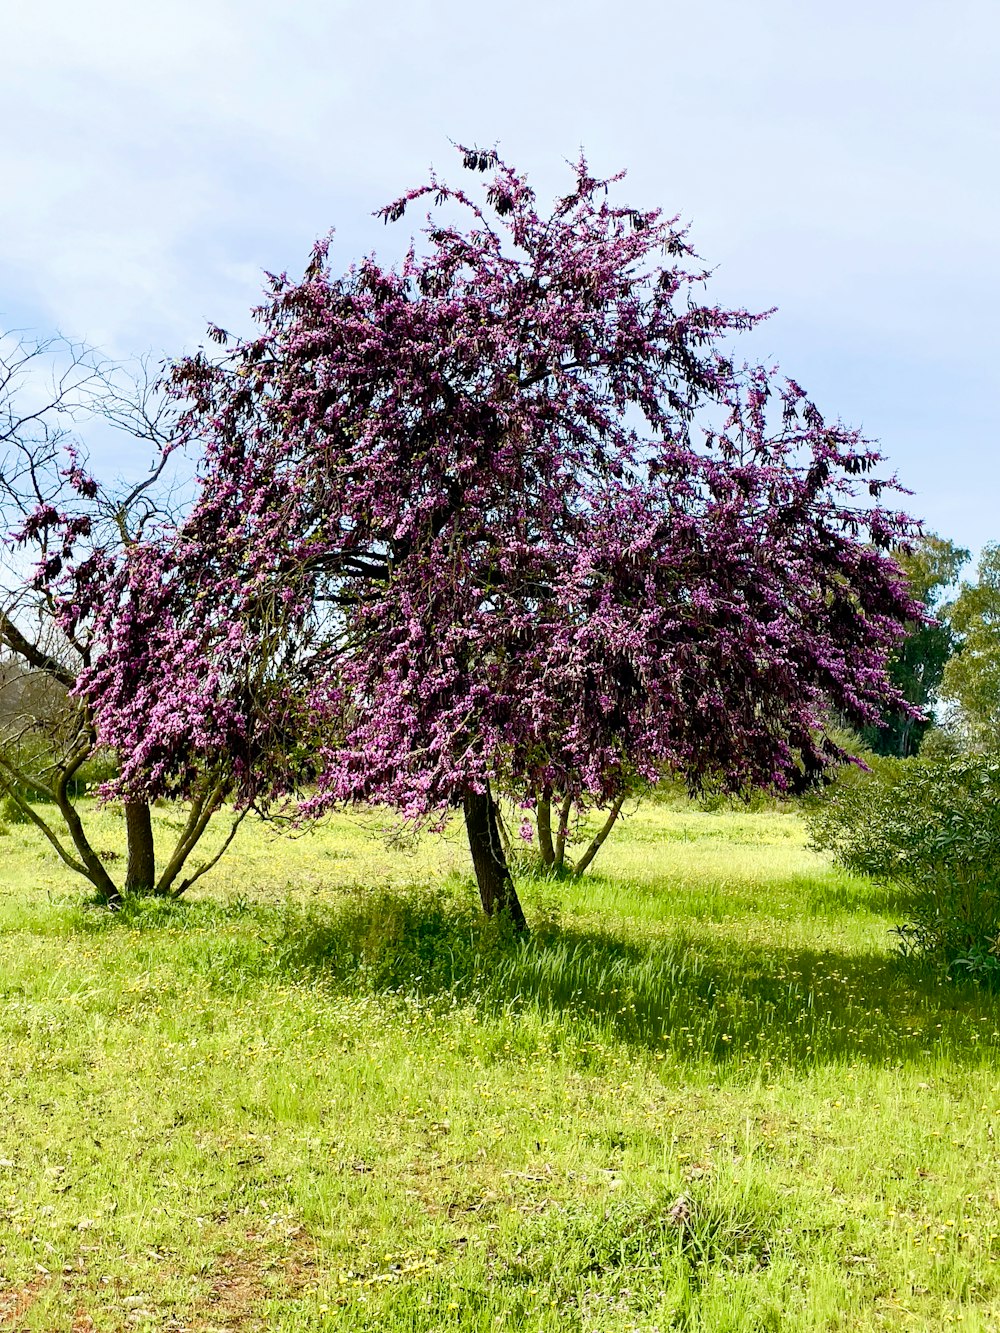 a tree with purple flowers in a grassy field